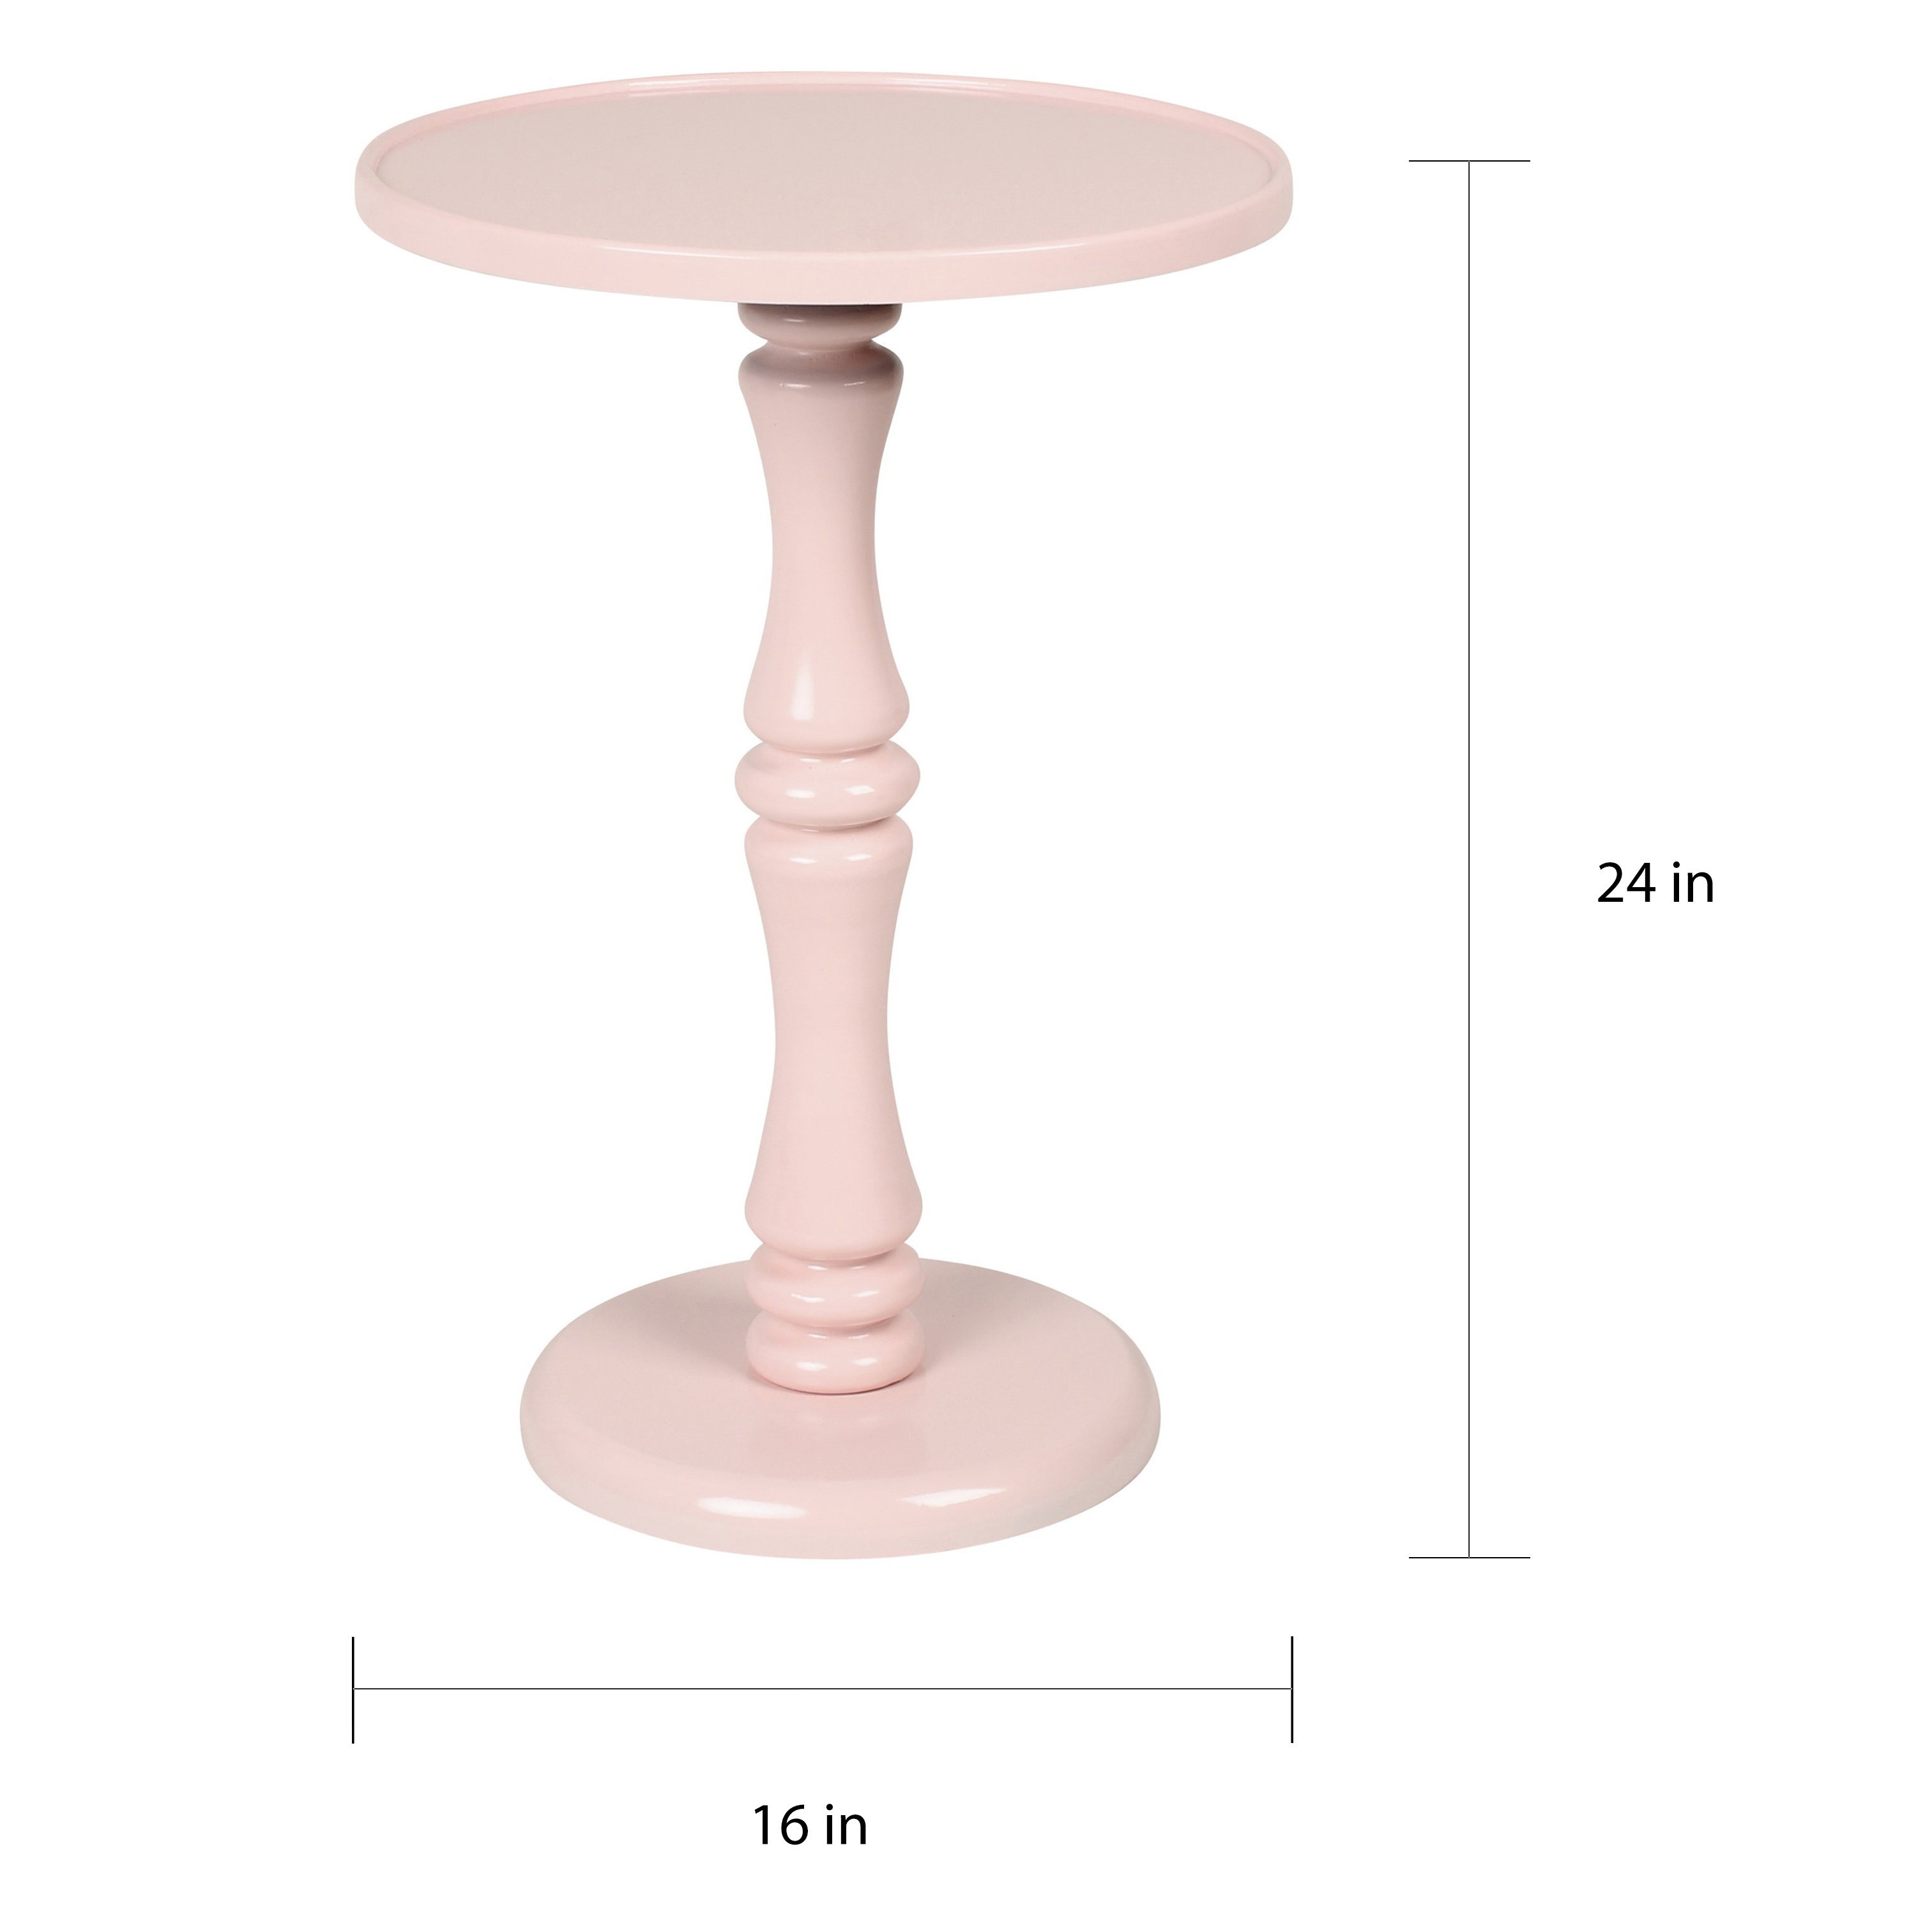 kate and laurel rumi round wood pedestal accent table free shipping today dark chest coffee black white marble dining home office decor ideas furniture legs pallet end glass sets